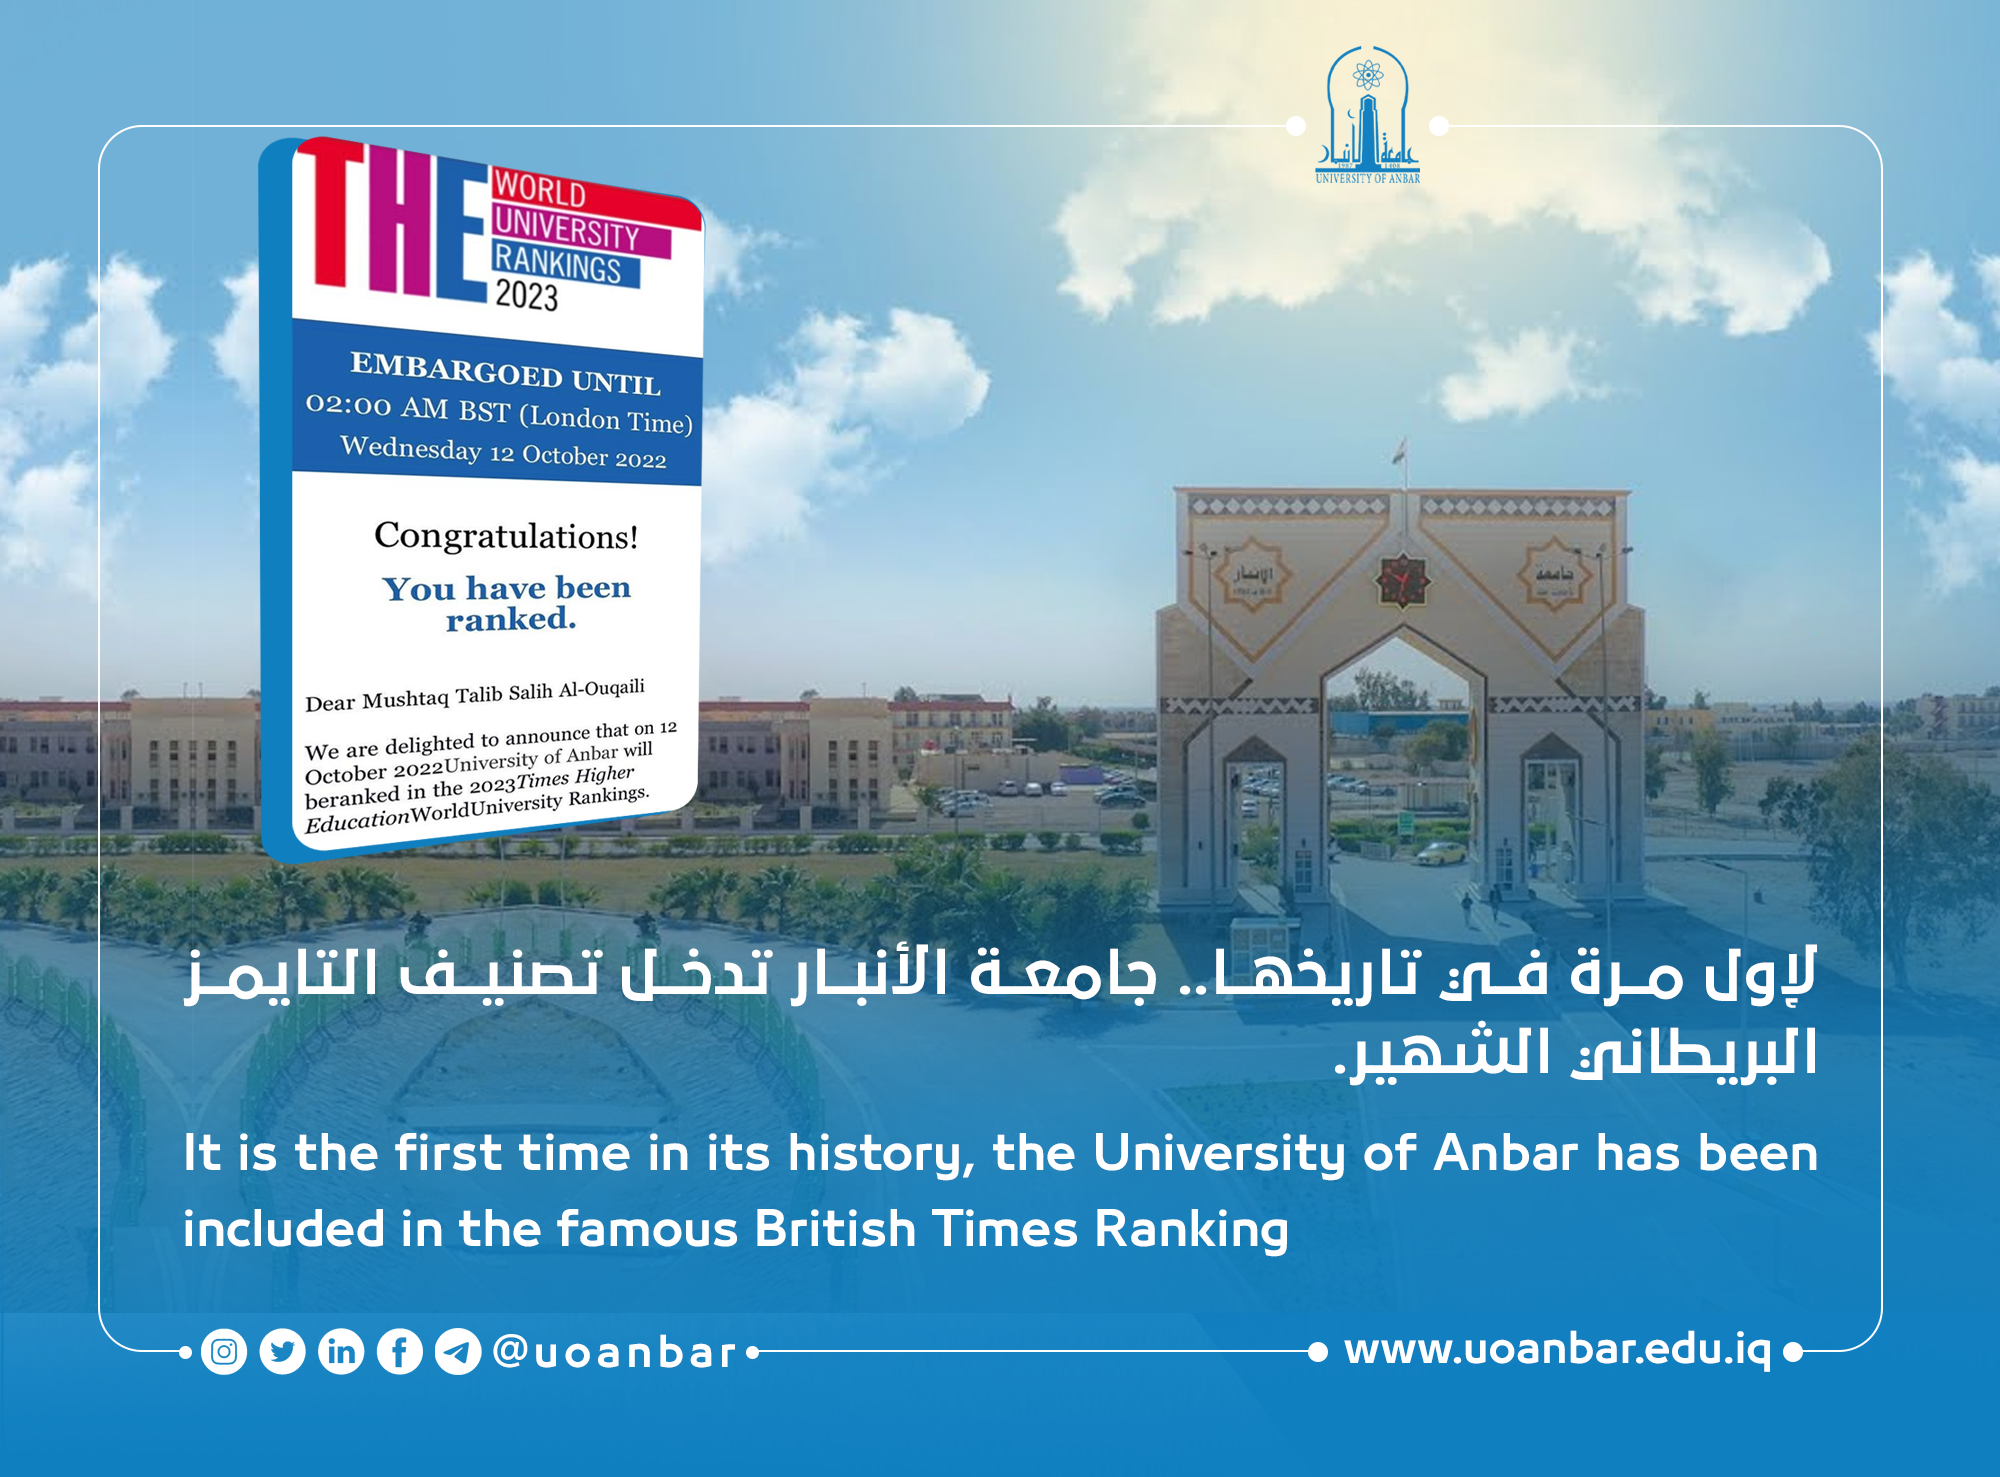 the University has been included in the Times Ranking